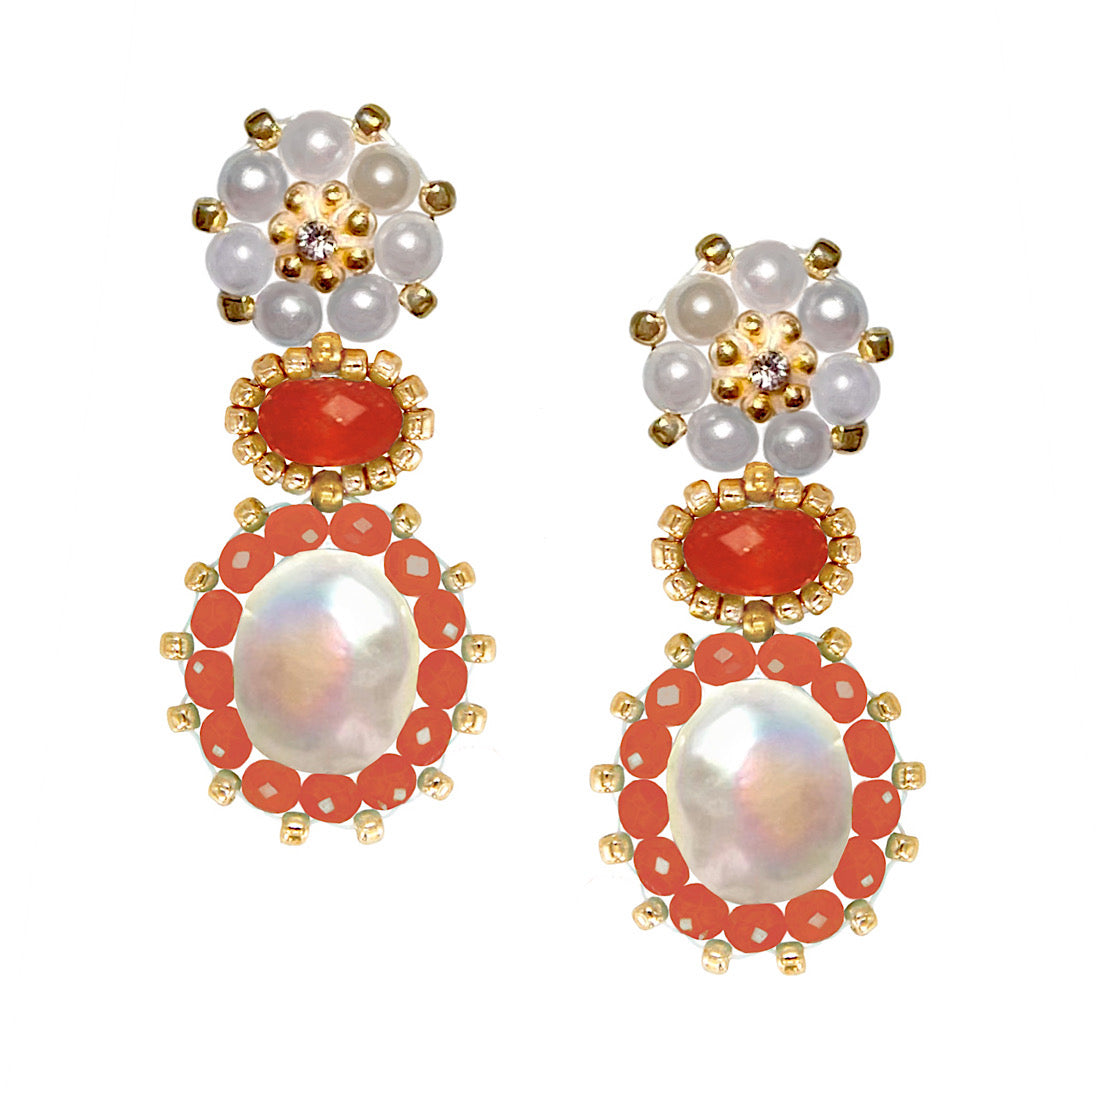 coral summery statement pearl earrings with freshwater pearls and gemstones